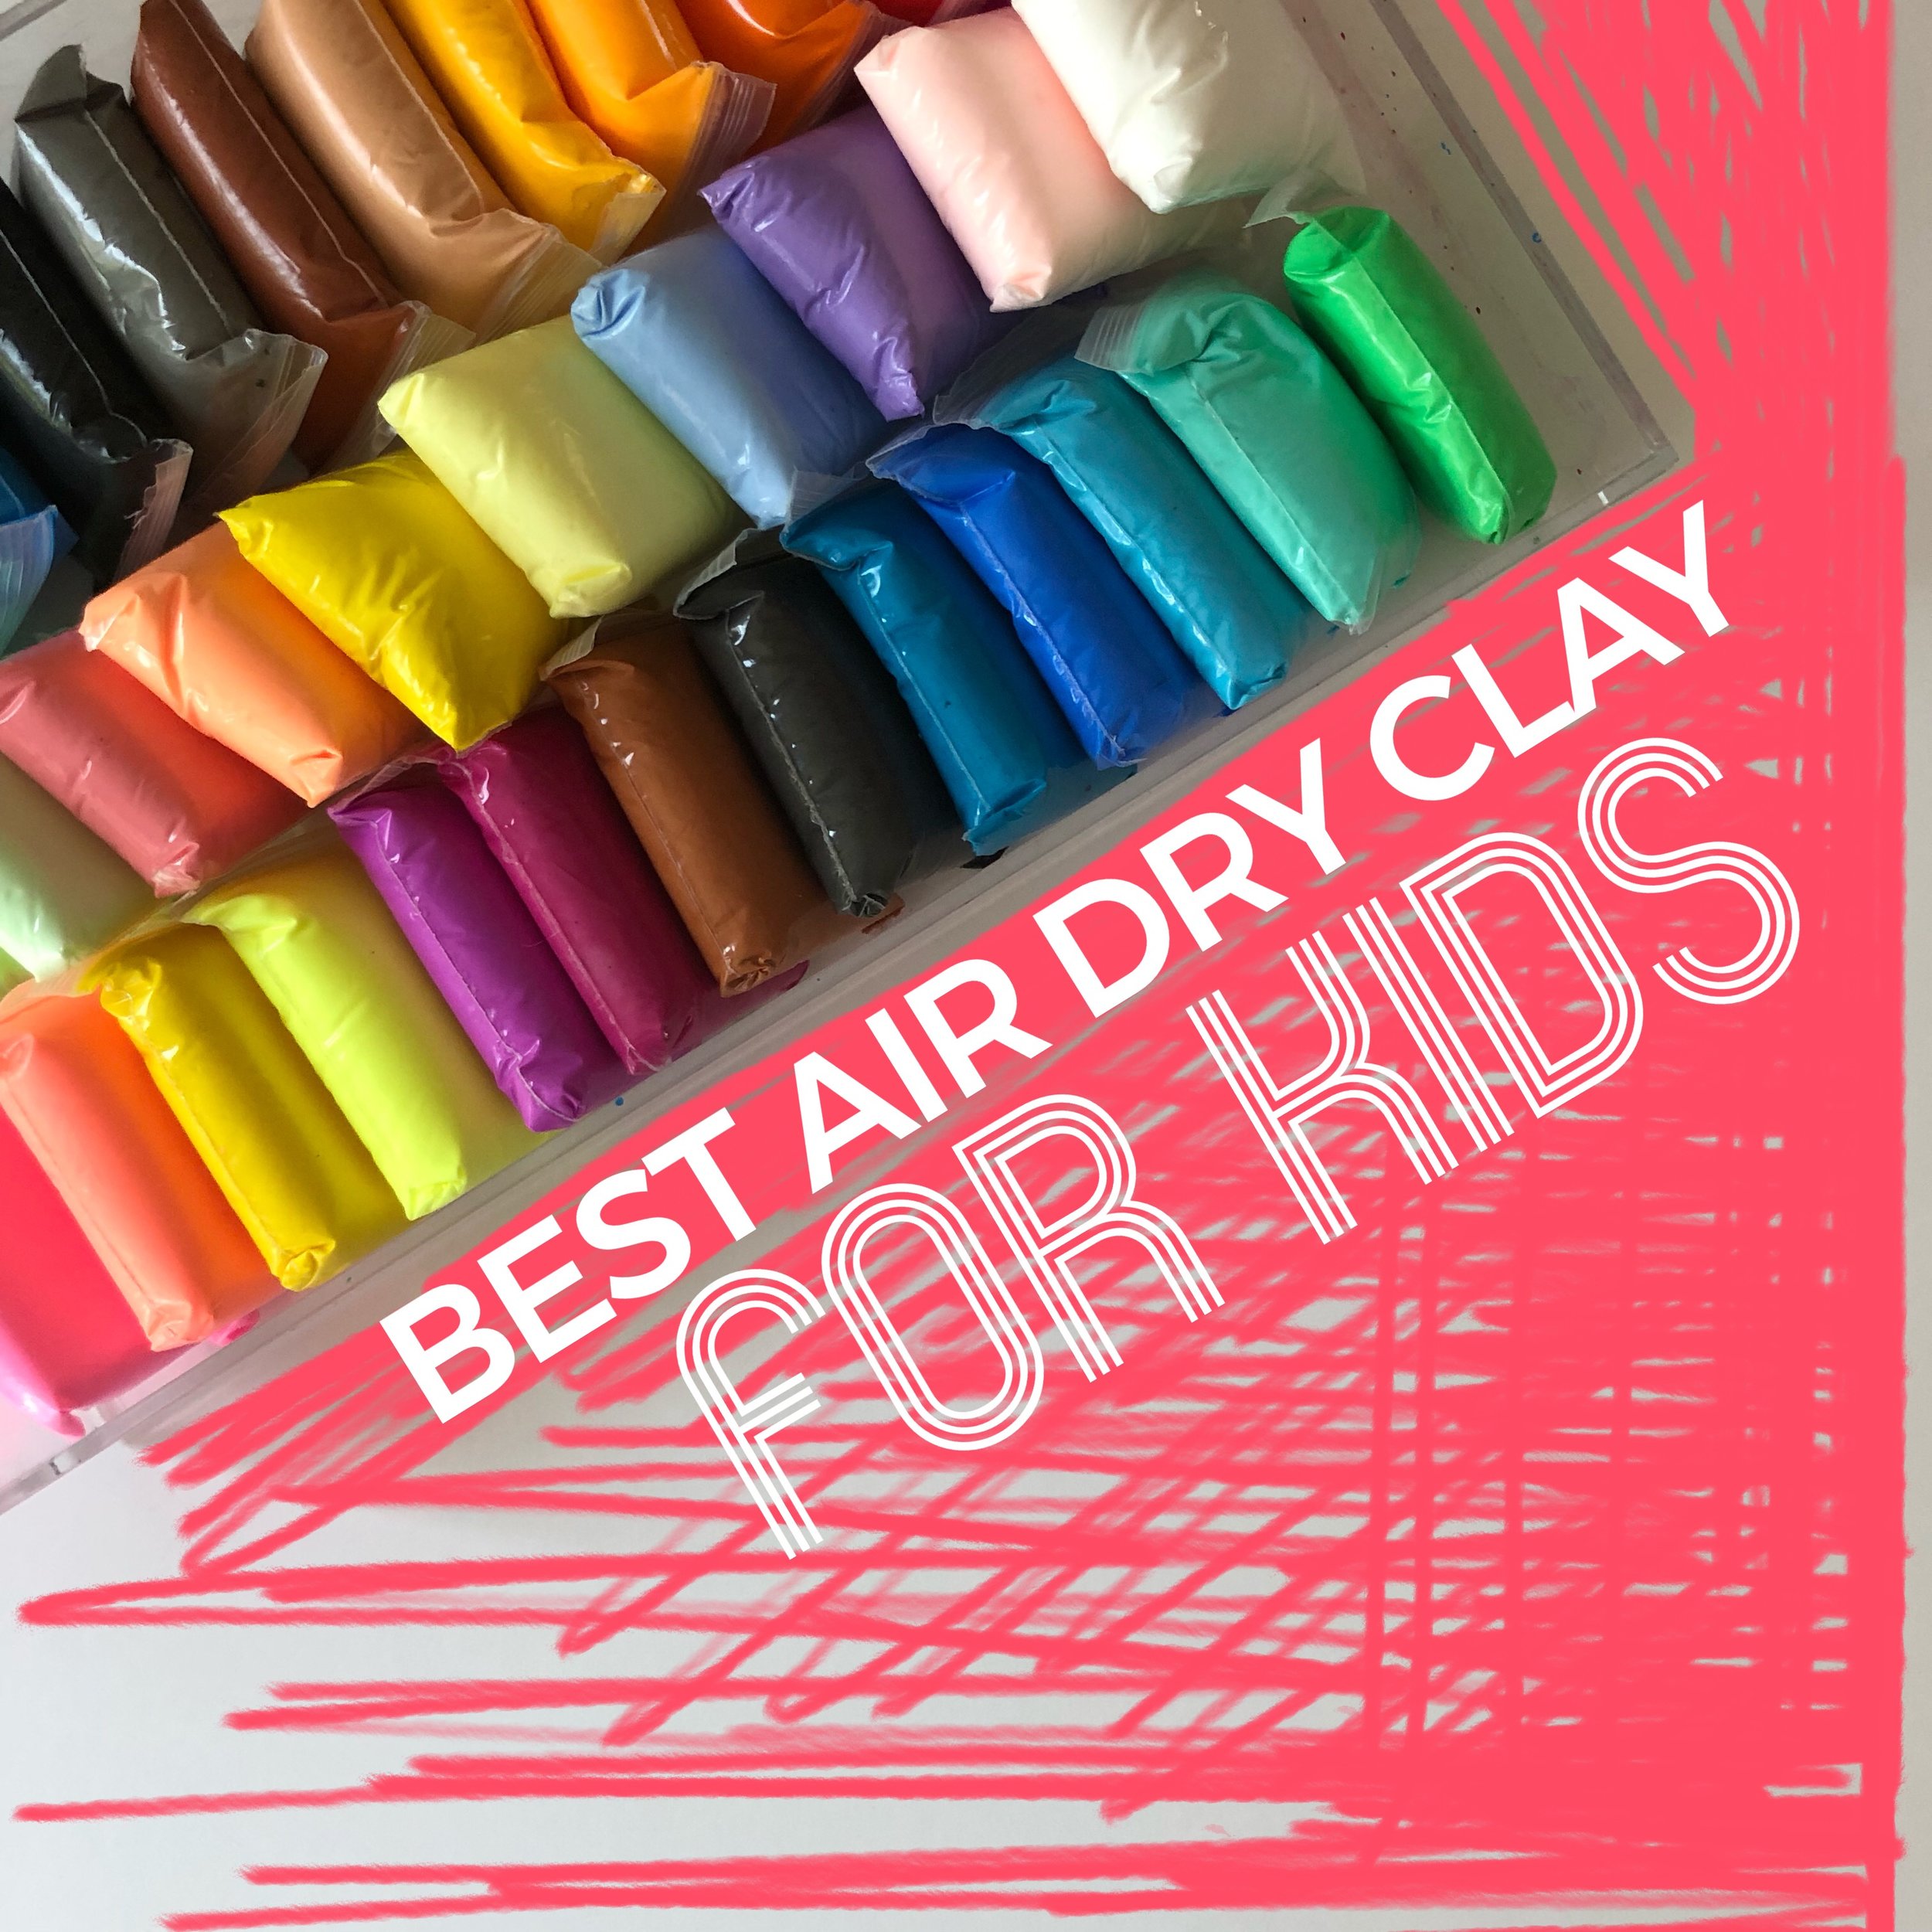 The Best Air Dry Clays for Artists